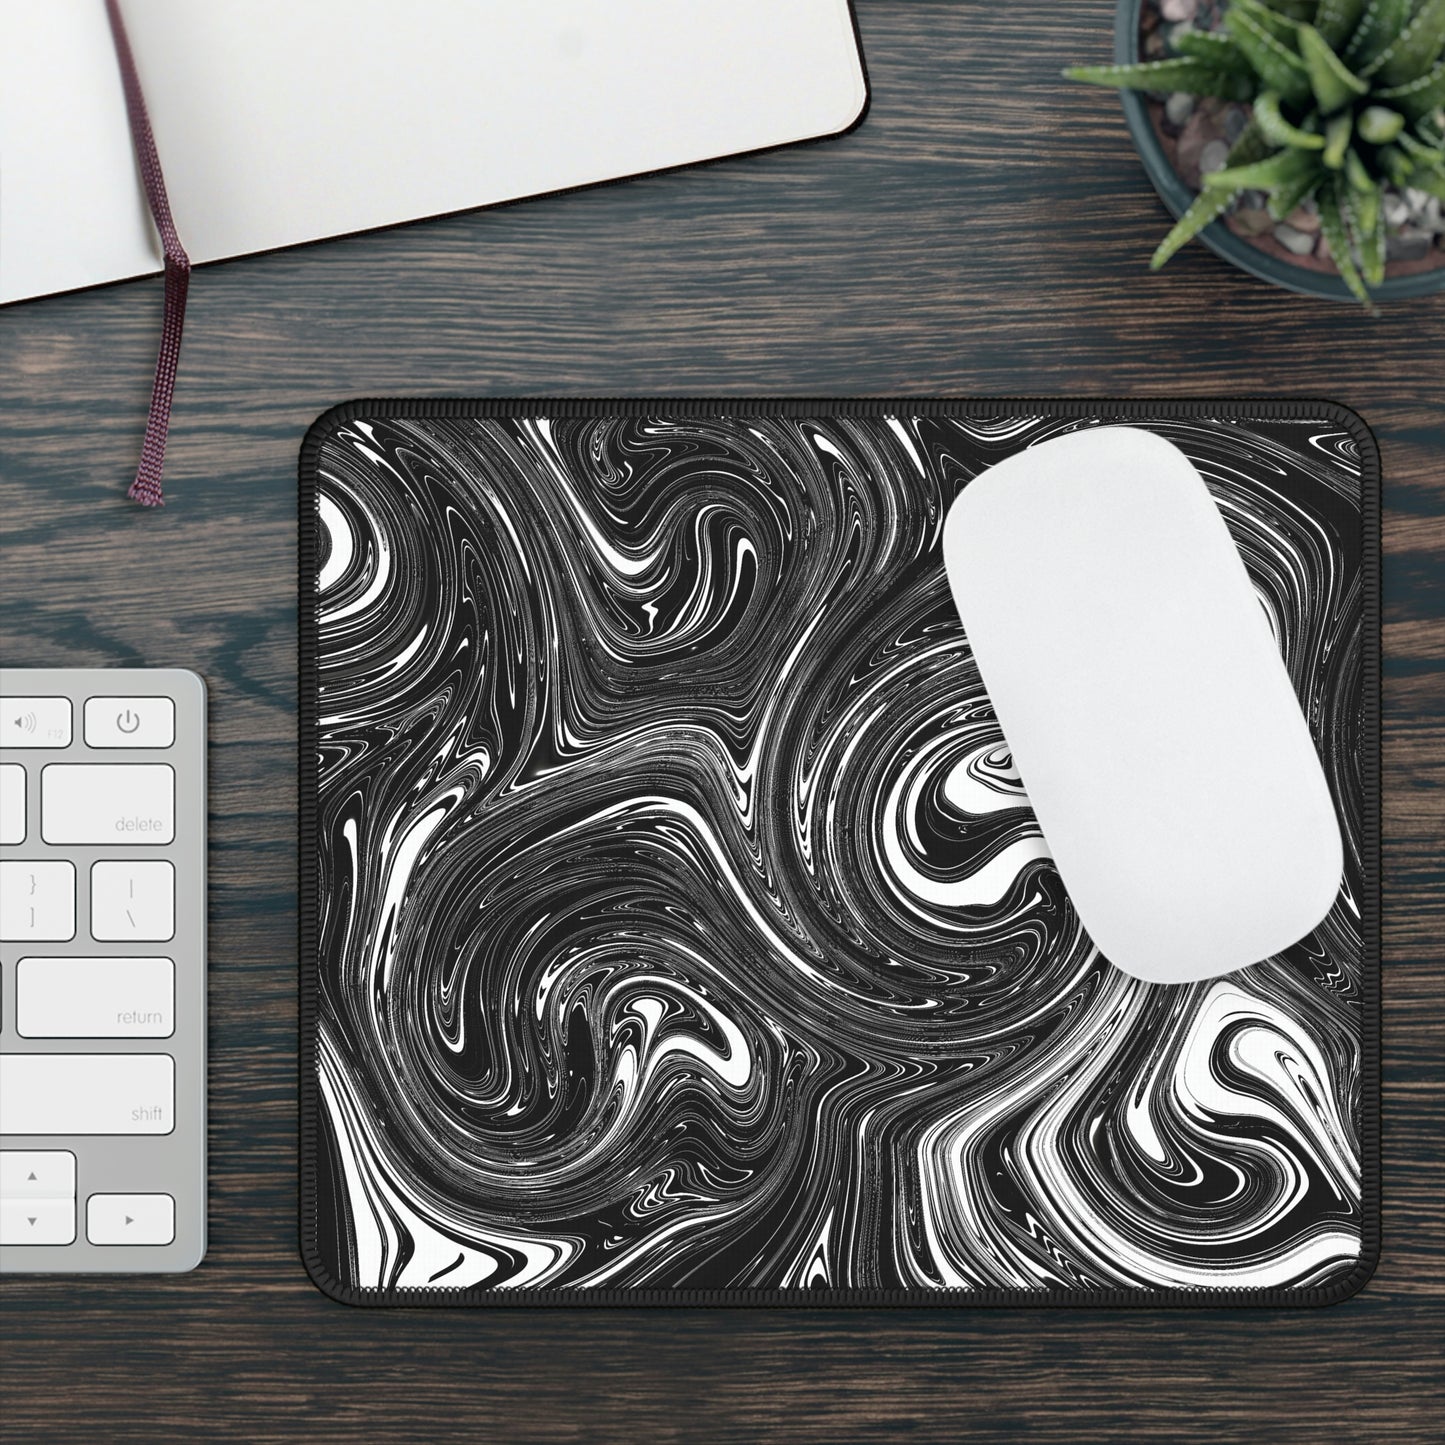 A gaming mouse pad with black and white swirls. A mouse sits on top of it.